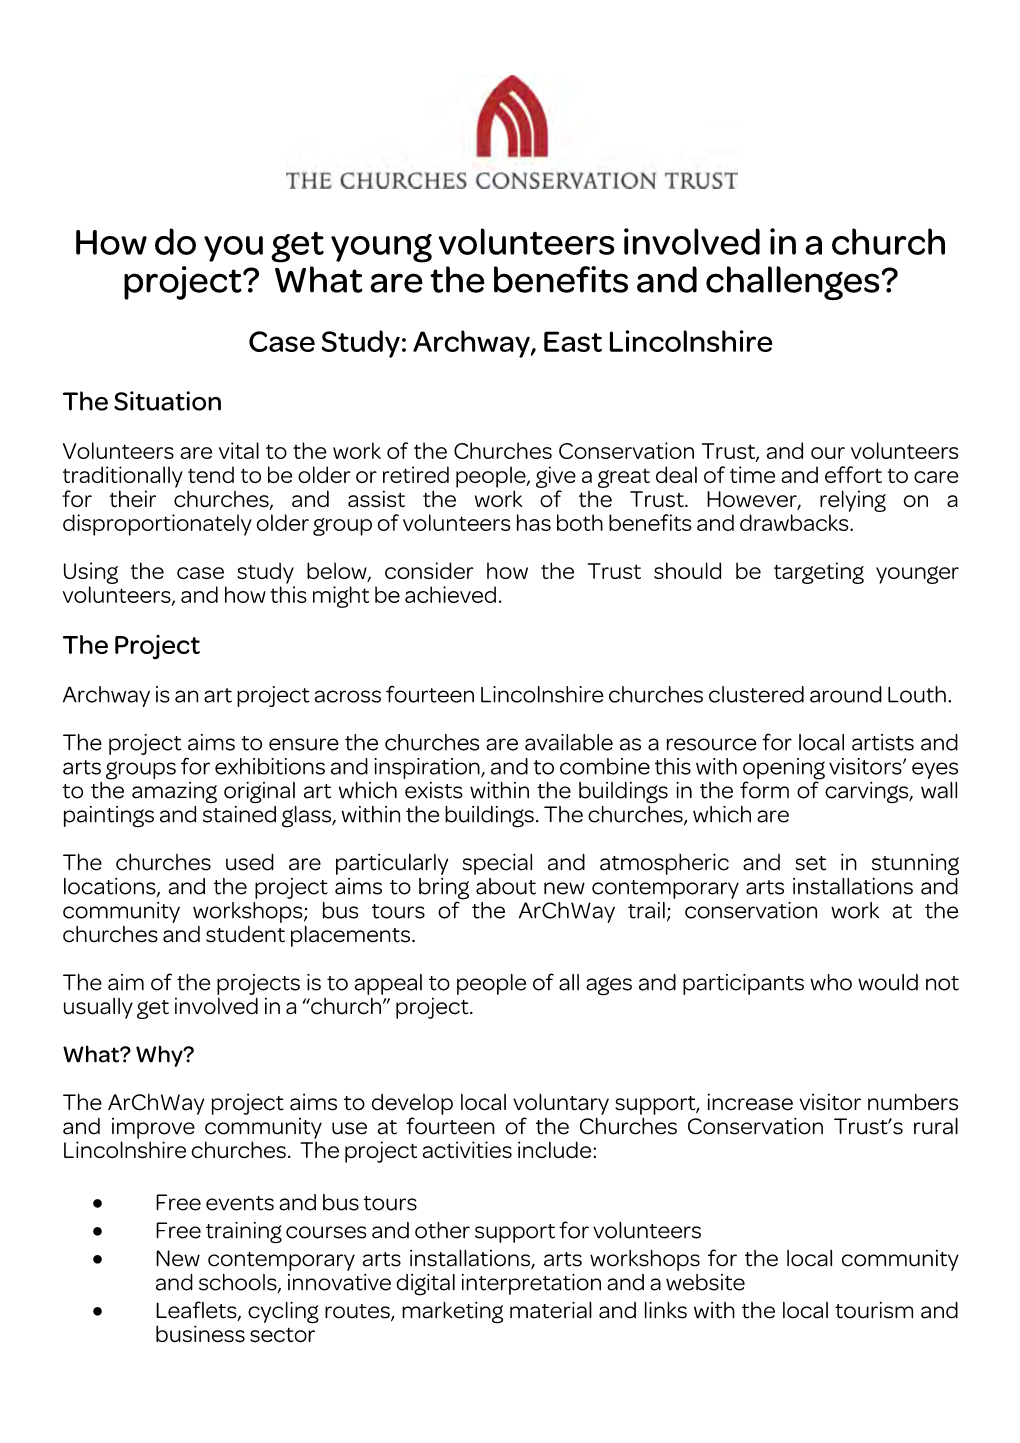 How Do You Get Young Volunteers Involved in a Church Project? What Are the Benefits and Challenges?